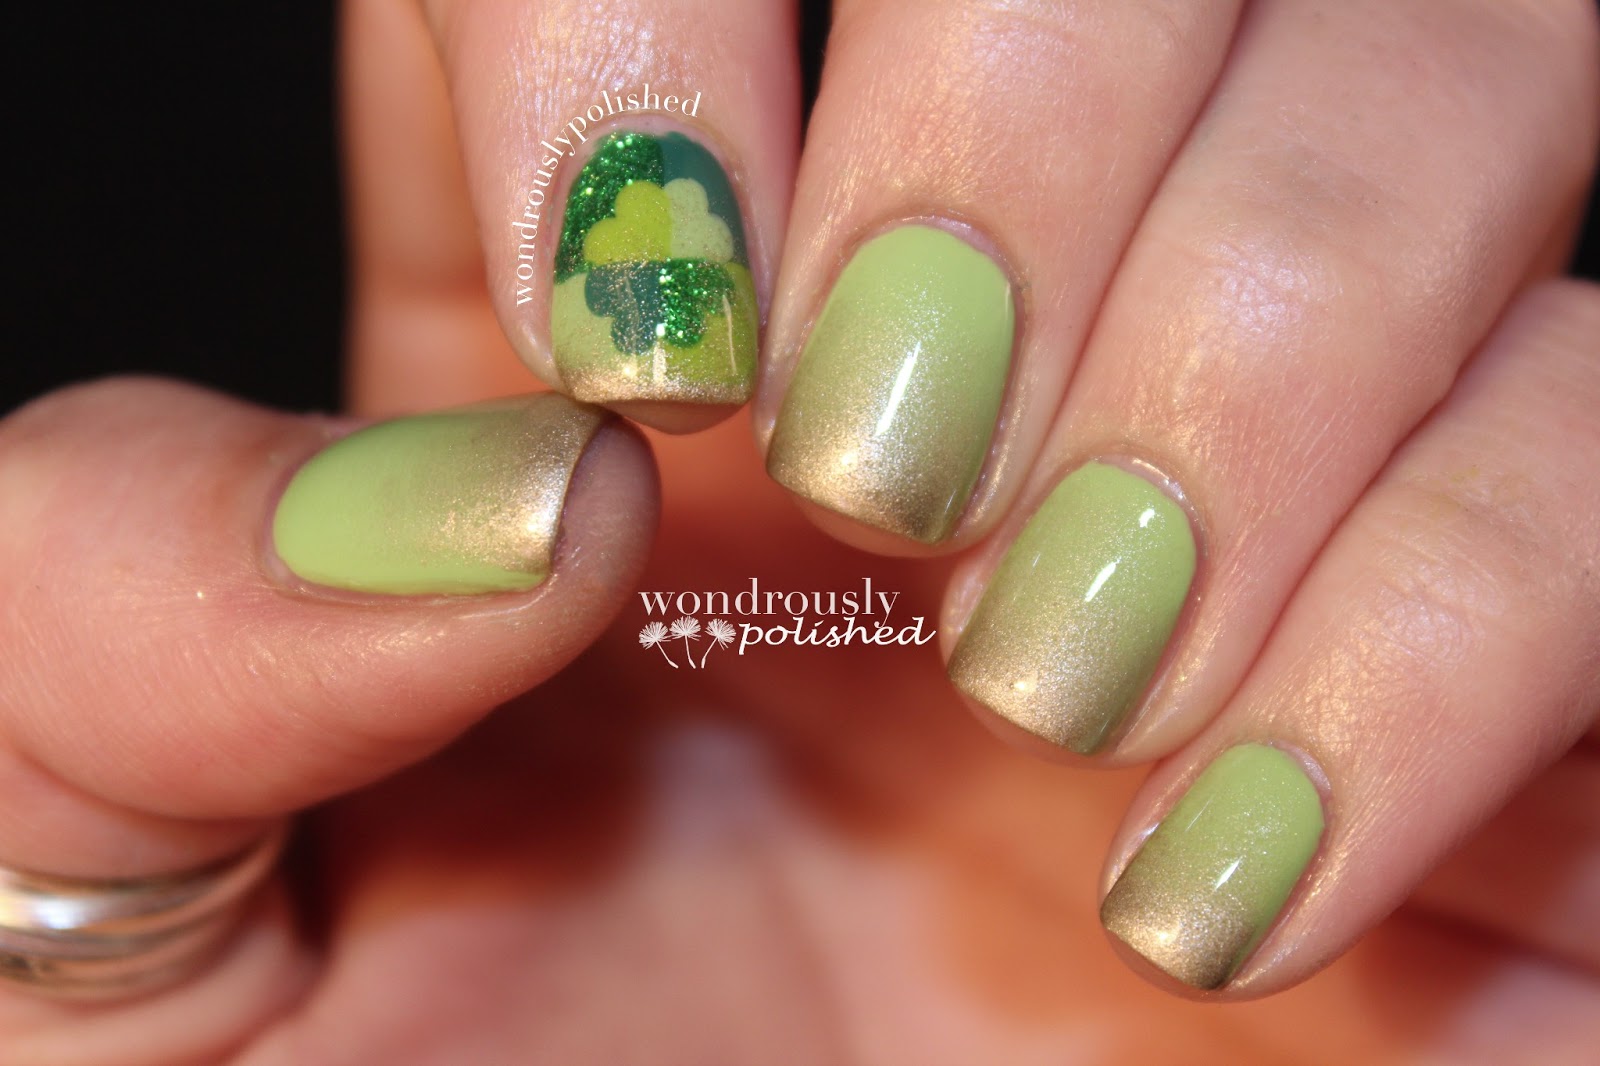 1. "10 Minute Nail Art Challenge" - wide 3